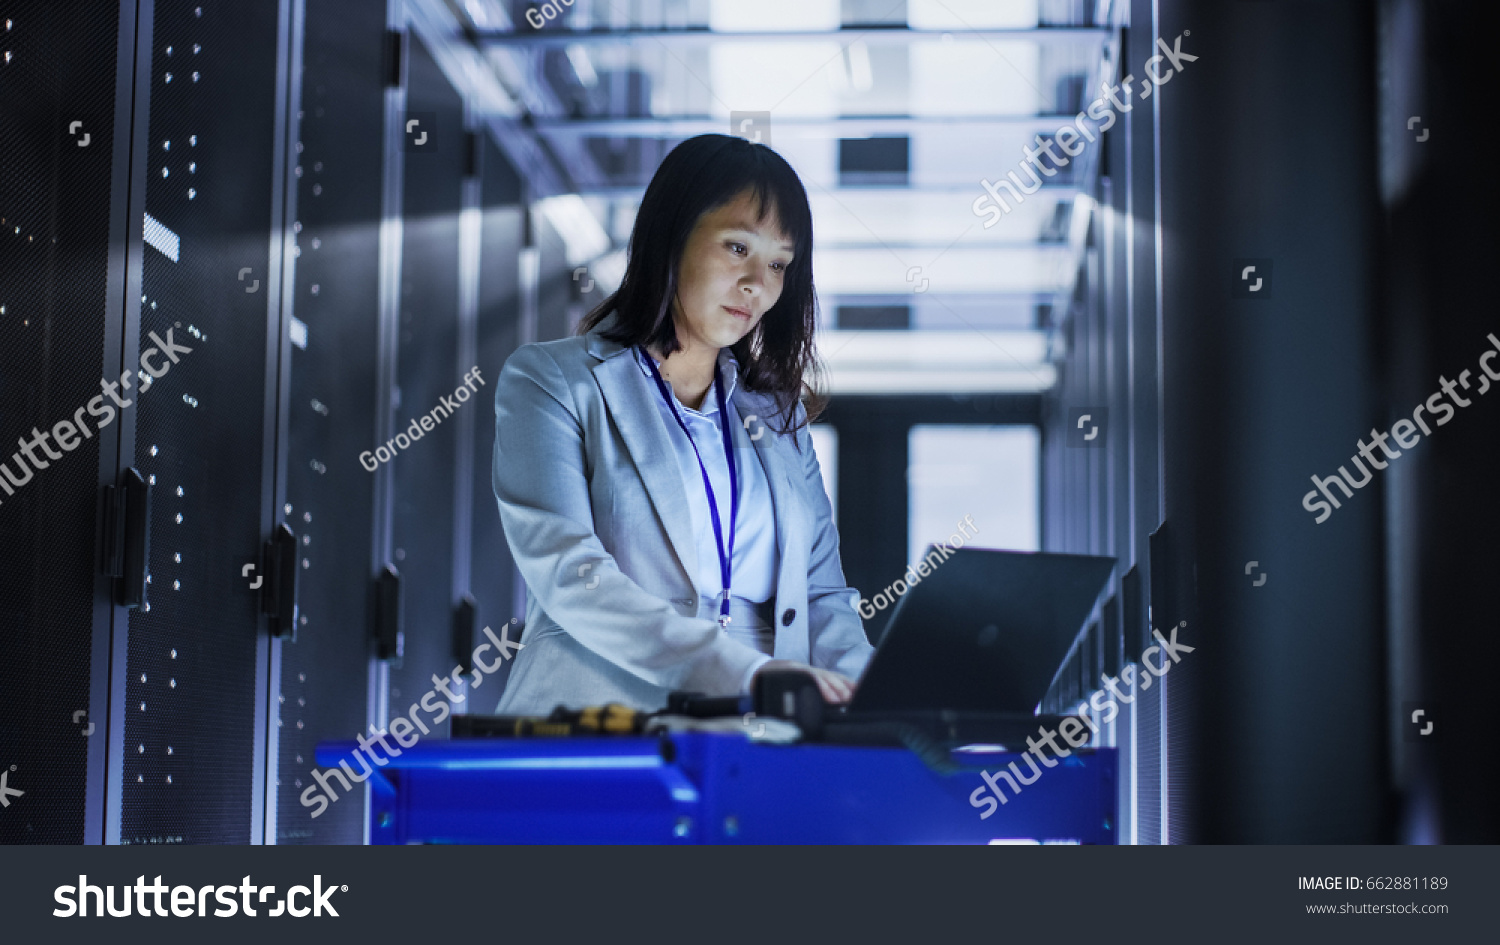 Asian Female IT Engineer Working on a Laptop on Tool Cart, She Scans Hard Drives.  She's in a Big Data Center Full of Rack Servers. #662881189